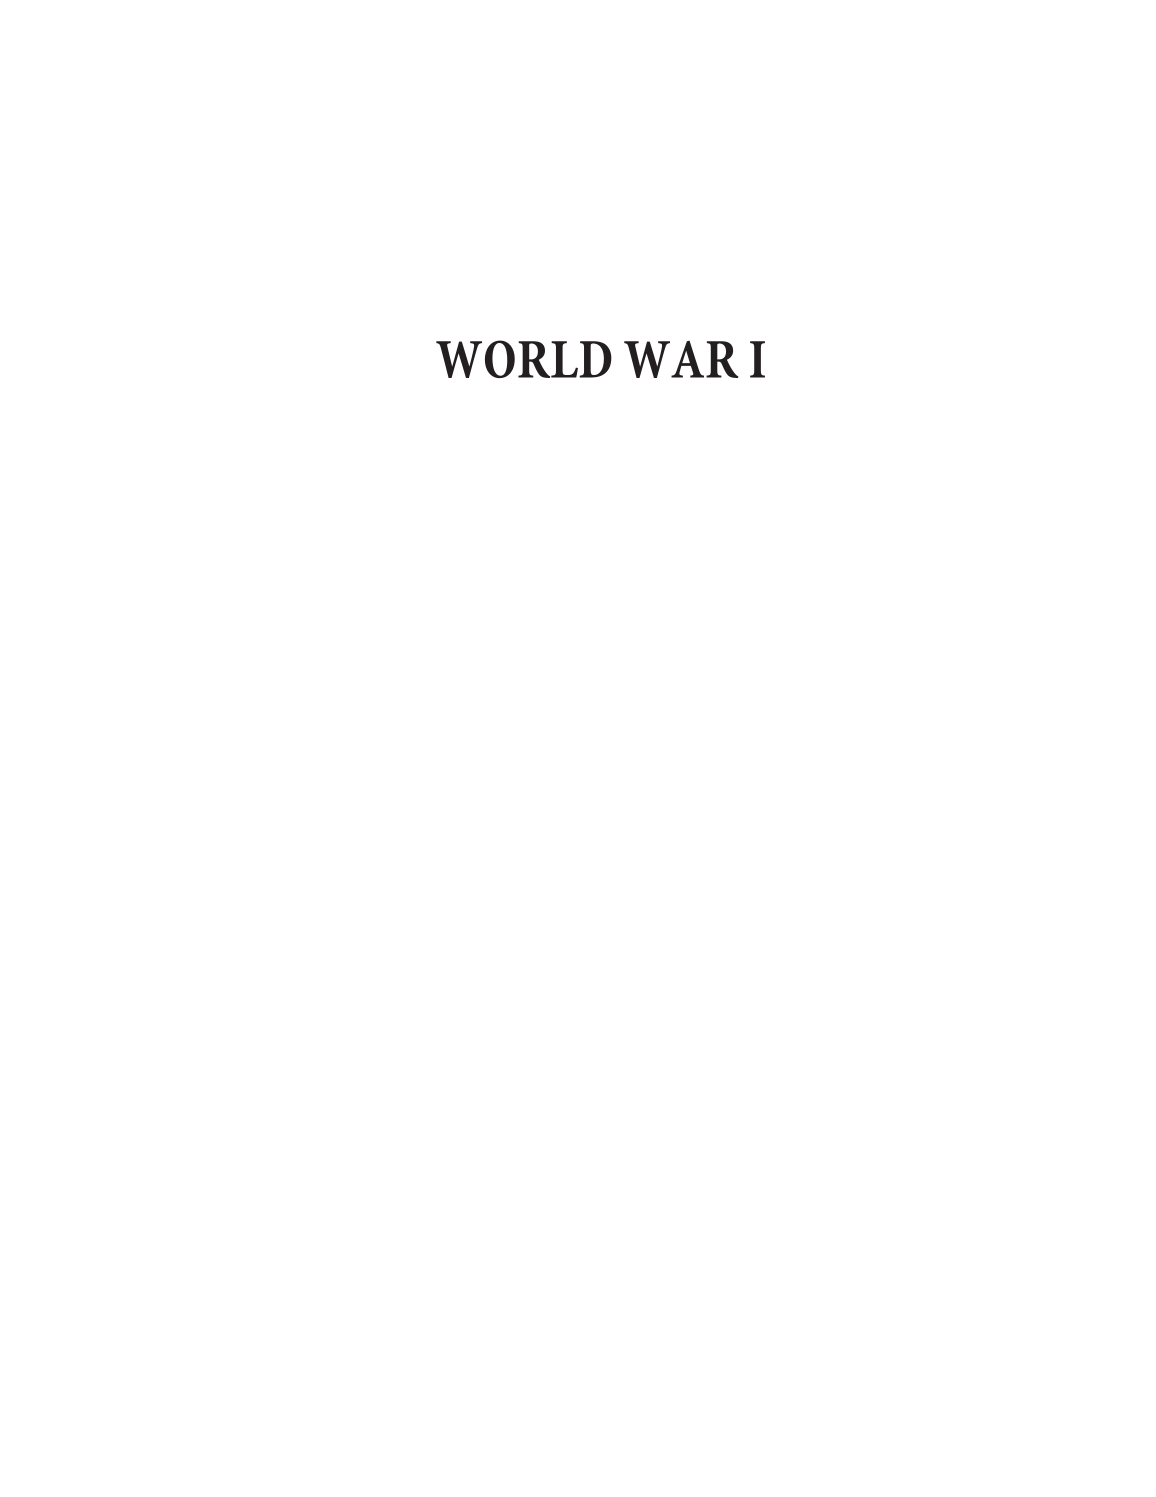 World War I: The Definitive Encyclopedia and Document Collection [5 volumes] page i